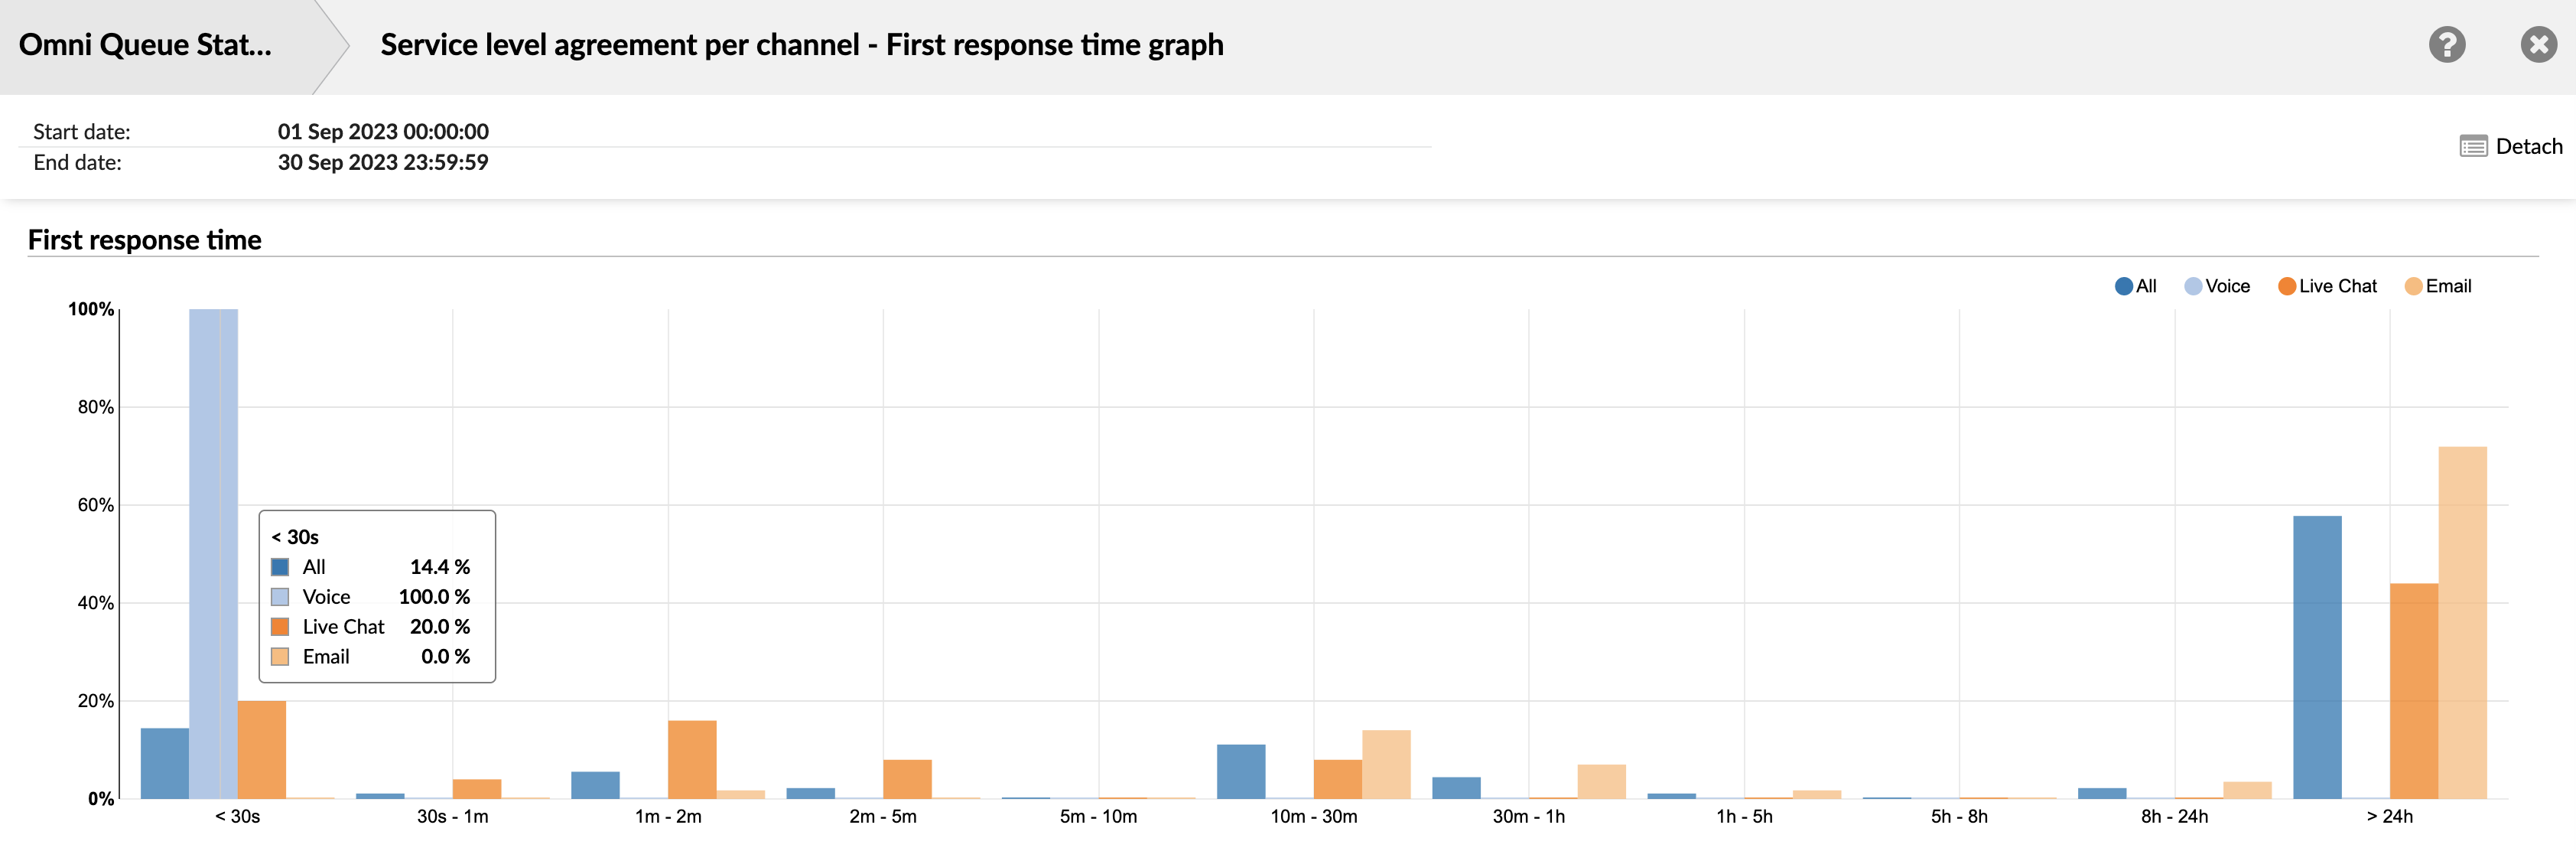 service_level_agreement_per_channel_-_first_response_time_graph.png